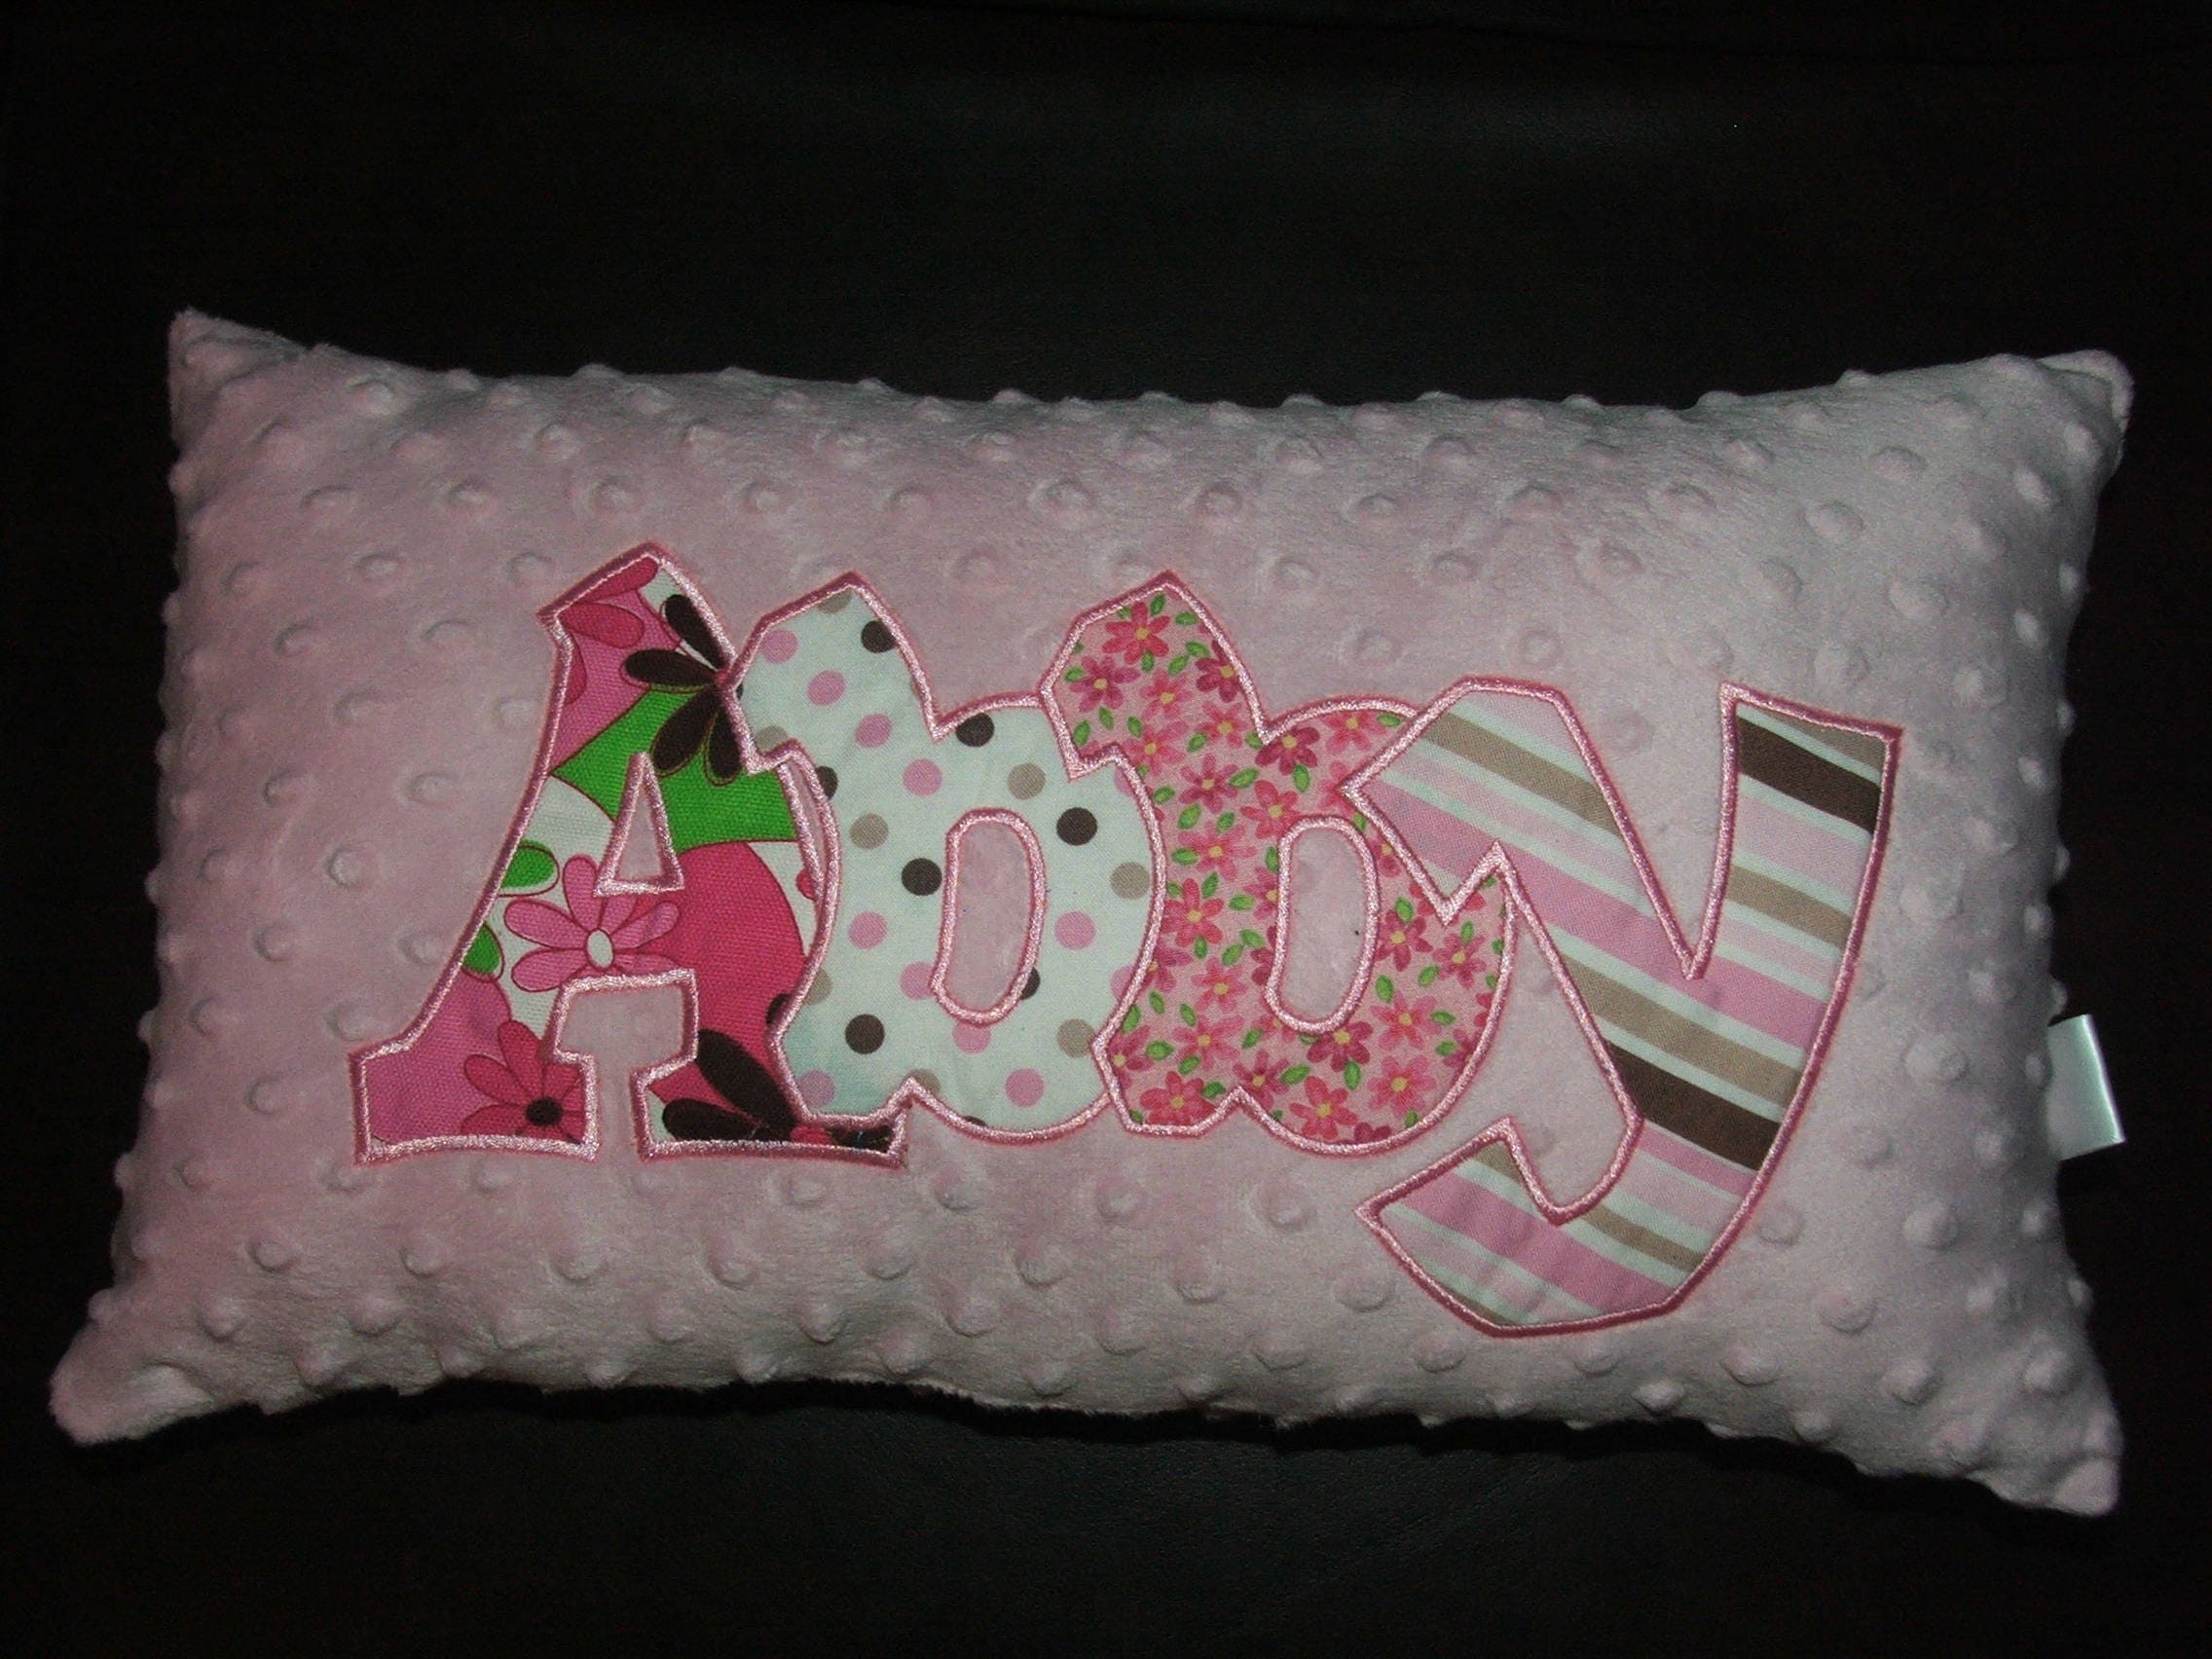 Birthday/Wedding Present Gift for all Ages Soft&Minky Neck Pillows Advertising or Fundraiser Baby/Child Gift Initial Pillows